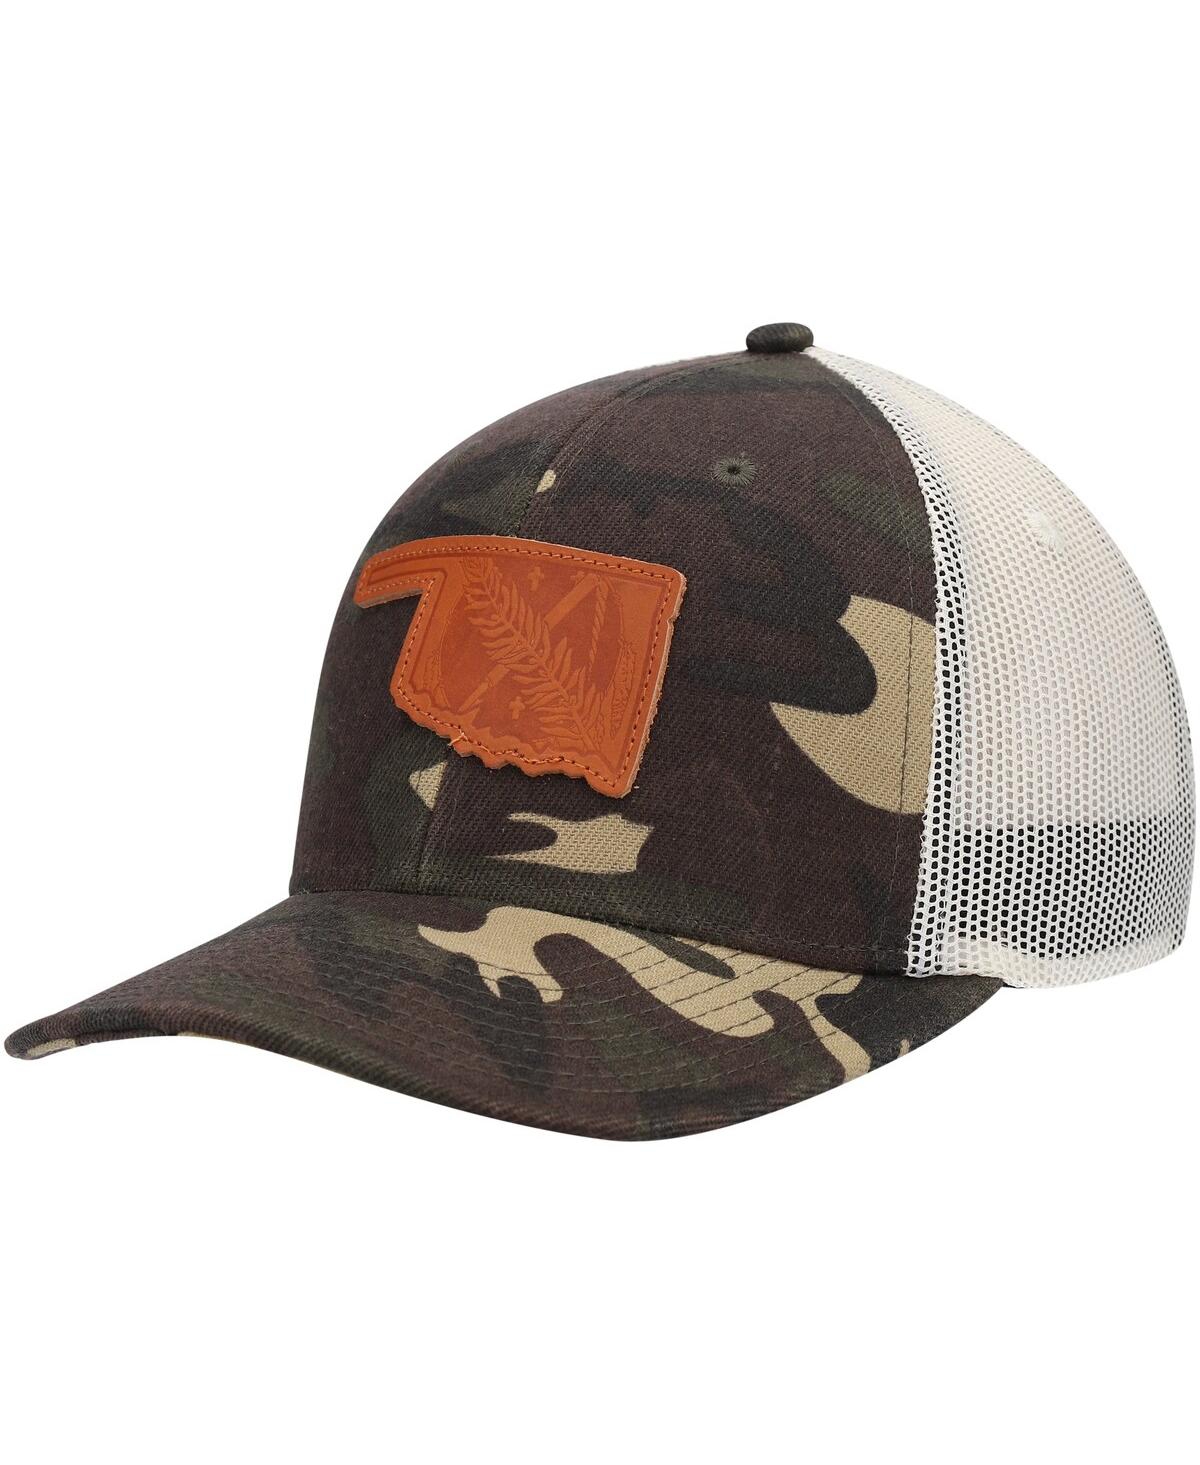 Men's Local Crowns Camo Oklahoma Icon Woodland State Patch Trucker Snapback Hat - Camo